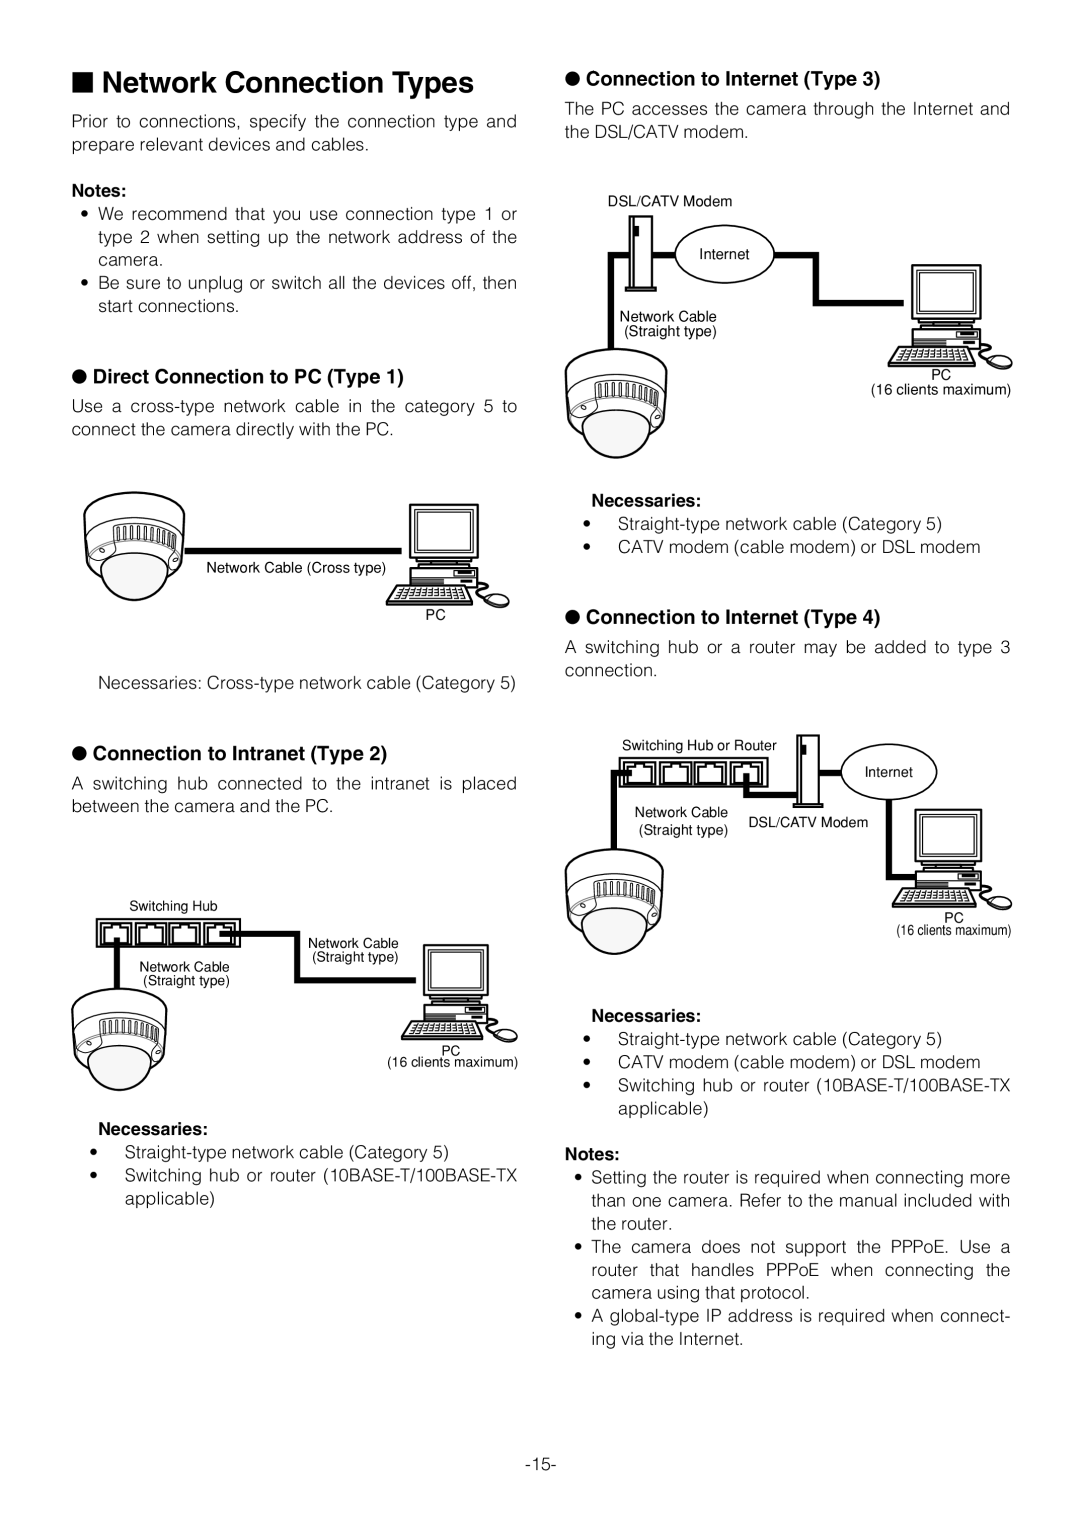 Pantech WV-NW474S manual Network Connection Types, Direct Connection to PC Type, Connection to Internet Type, Necessaries 